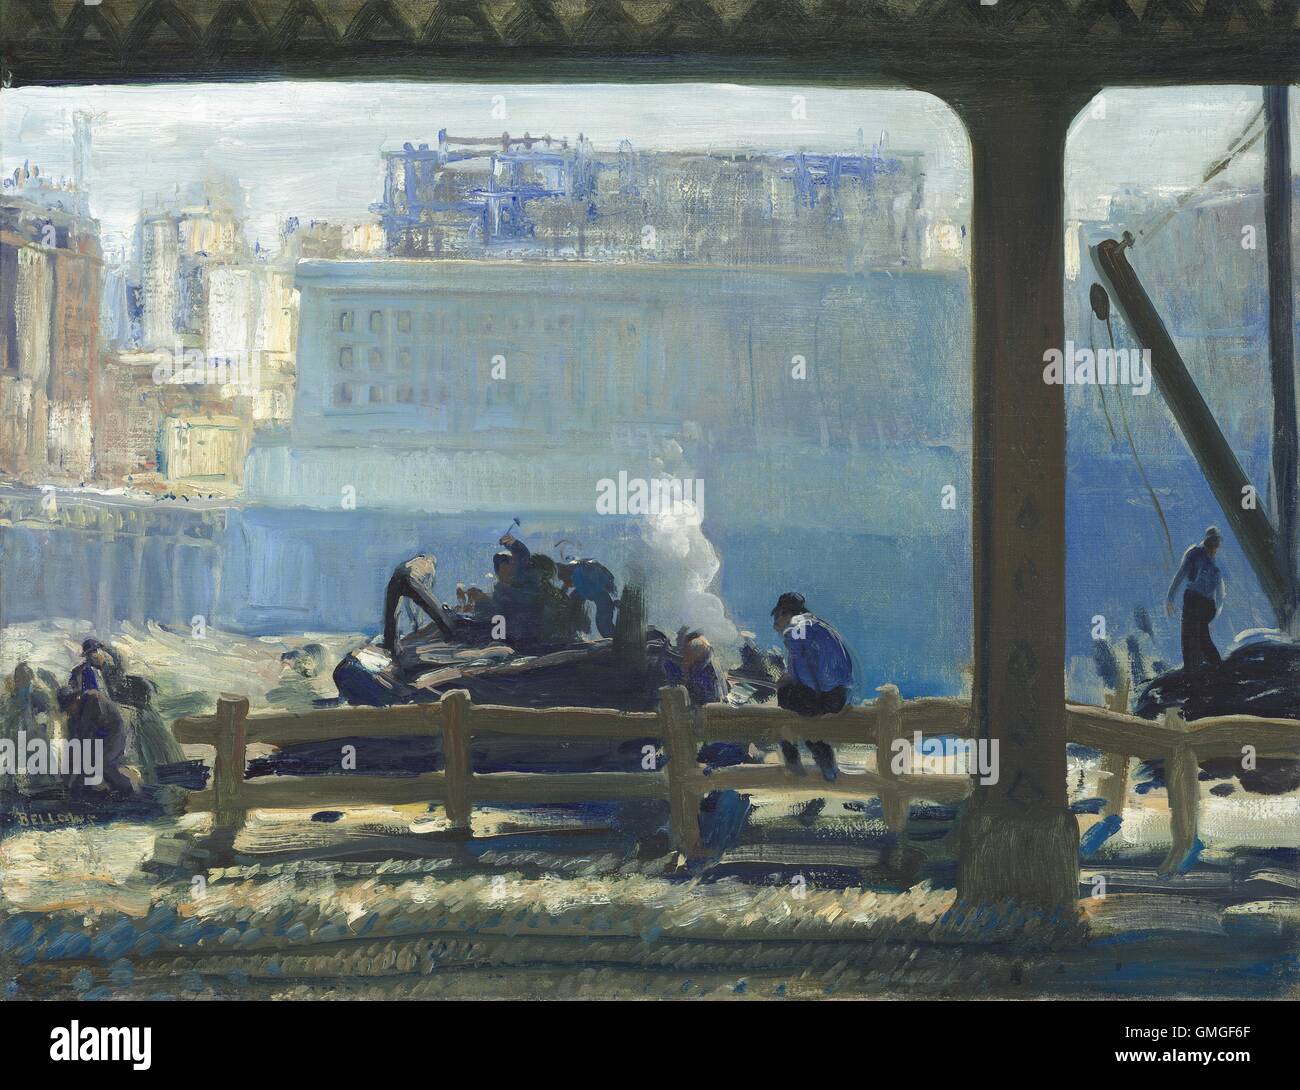 Blue Morning, by George Bellows, 1909, American painting, oil on canvas. The blue atmosphere veils the new Beaux-Arts facade of Stock Photo